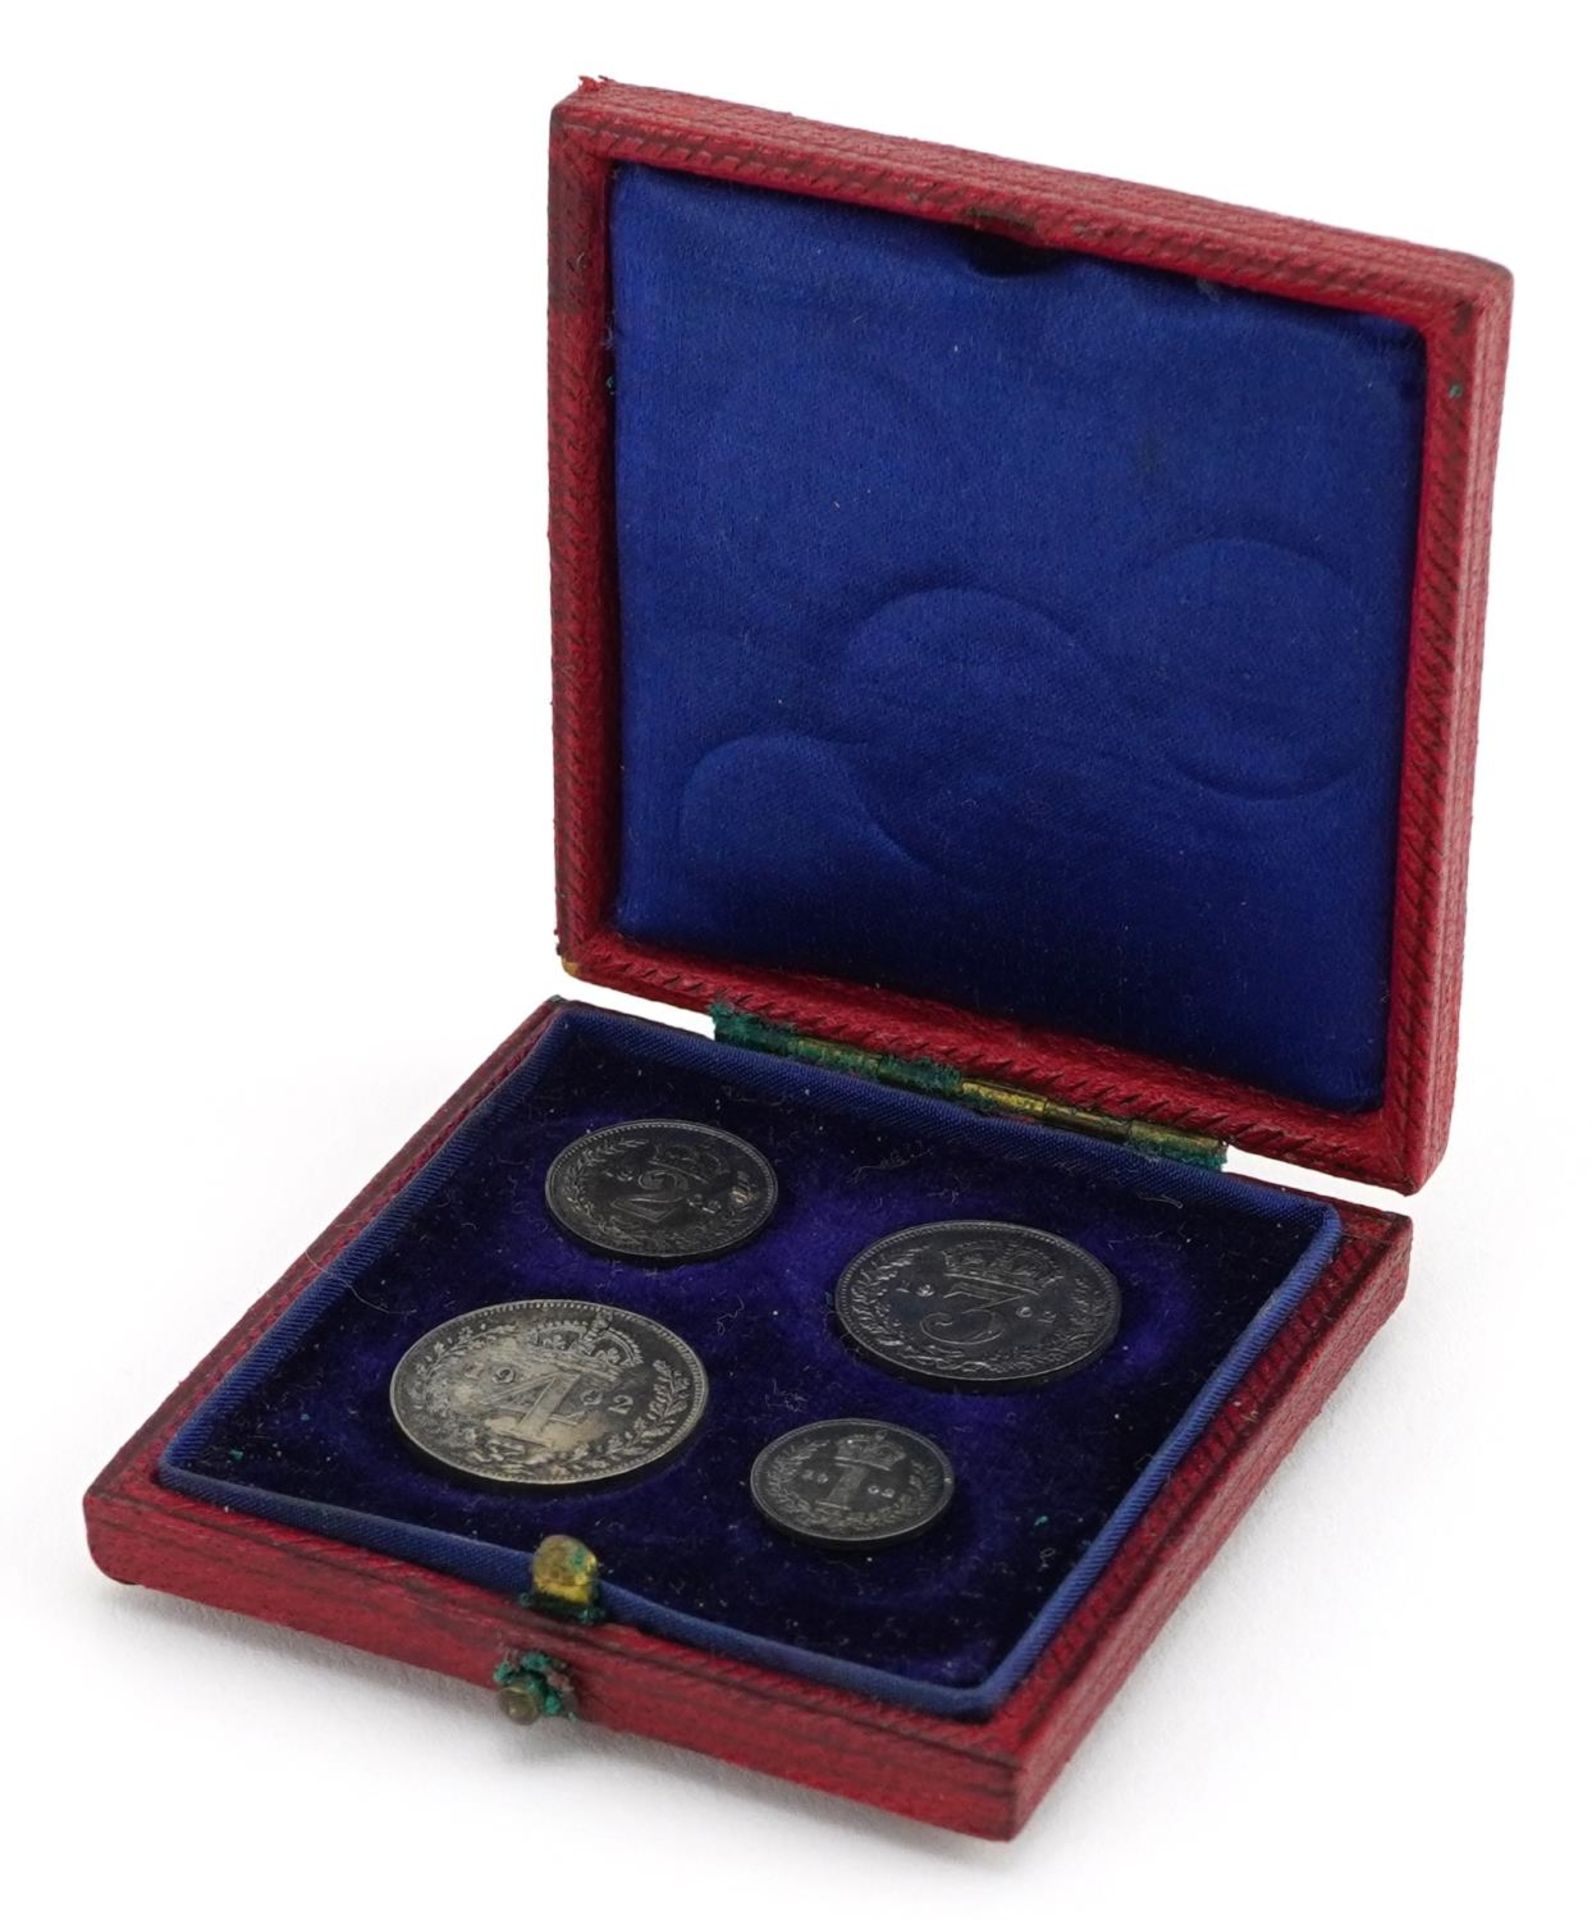 Edward VII 1902 Maundy four coin set housed in a silk and velvet lined fitted tooled leather